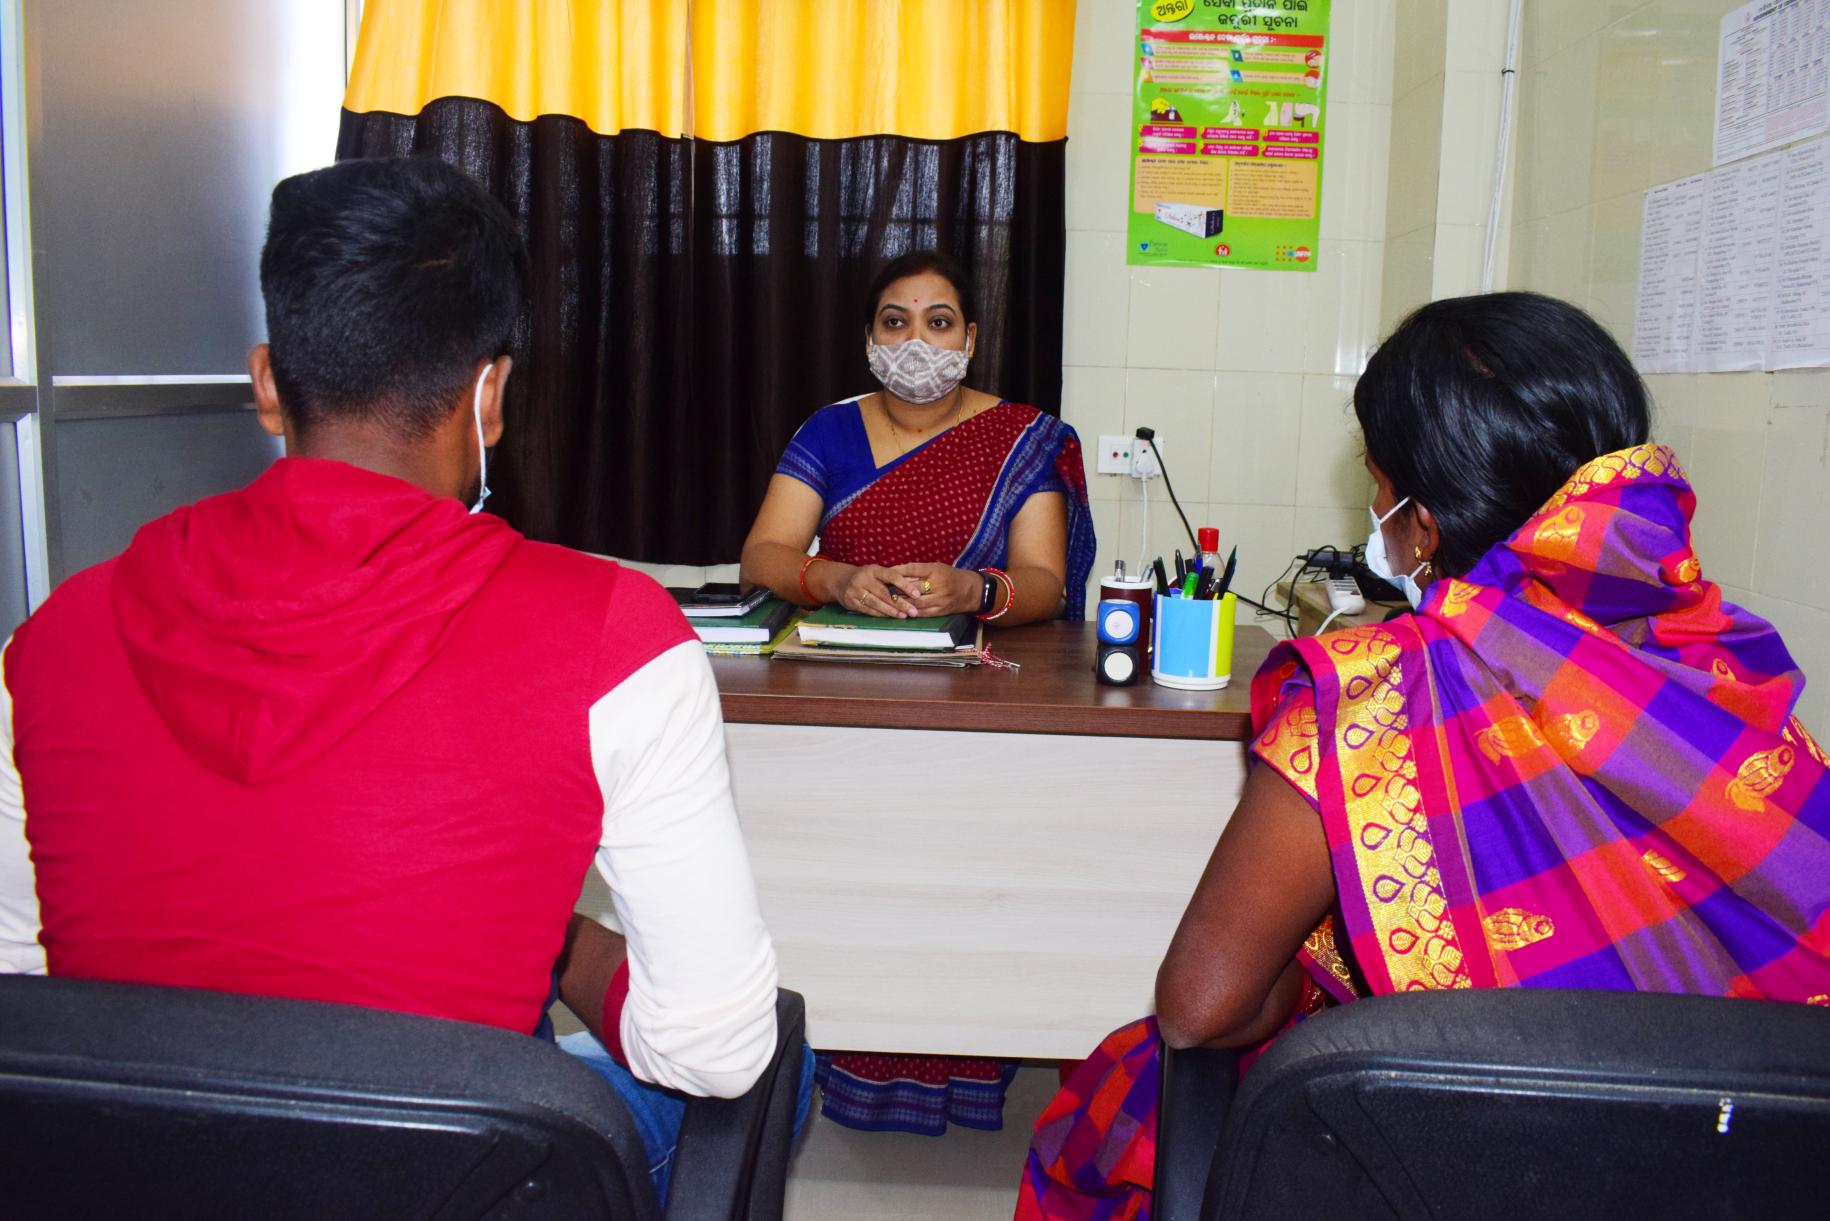 One of the healthcare workers trained to counsel speaks with clients at their office.